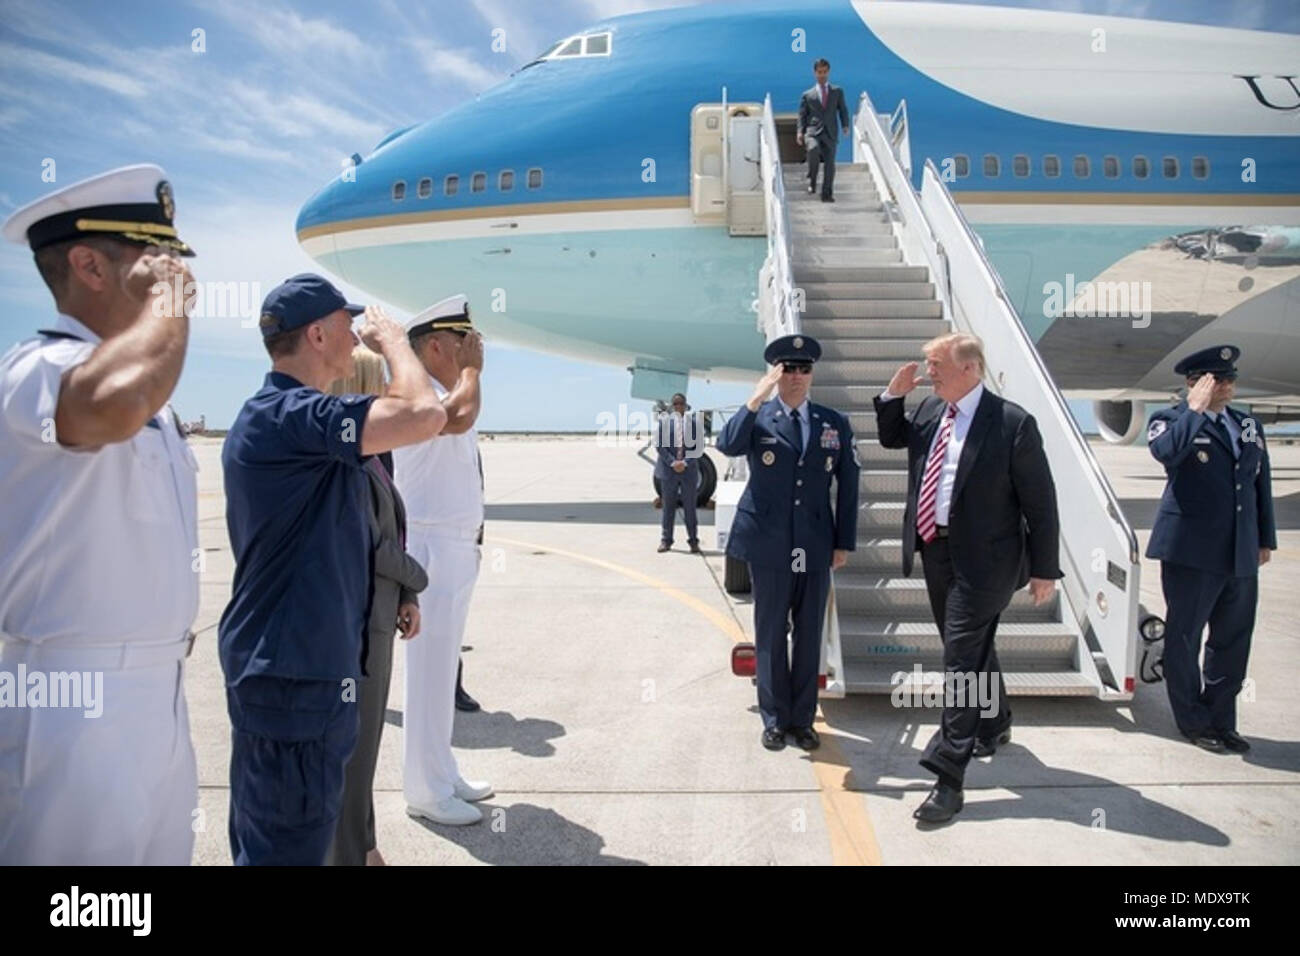 MIAMI, FL - WEEK OF APRIL 16: President Donald J. Trump waves as he disembarks Marine One at Joint Base Andrews, MD, Monday, April 16, 2018, escorted to Air Force One by Col. Casey Eaton, Commander 89th Airlift Wing, at Andrews Air Force Base. President Trump is flying to Miami International Airport to participate in a tax cuts for Florida small businesses roundtable at Bucky Dent Park, Monday, April 16, 2018, in Hialeah, FL   People:  President Donald Trump Stock Photo